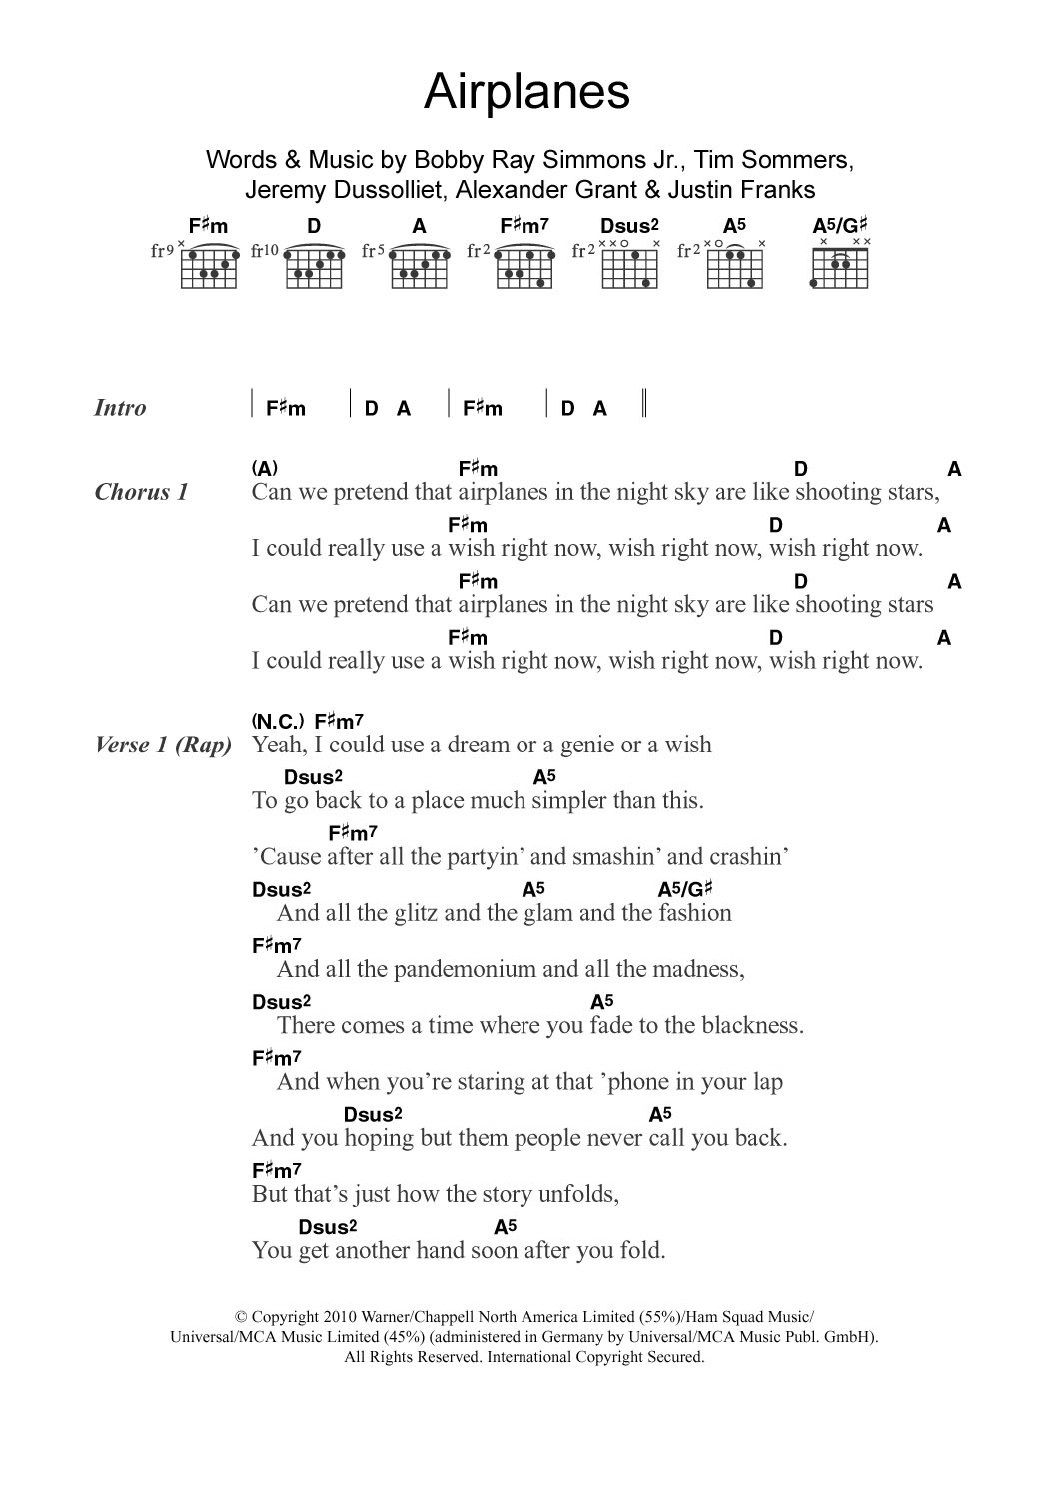 Download B.o.B Airplanes (featuring Hayley Williams) Sheet Music